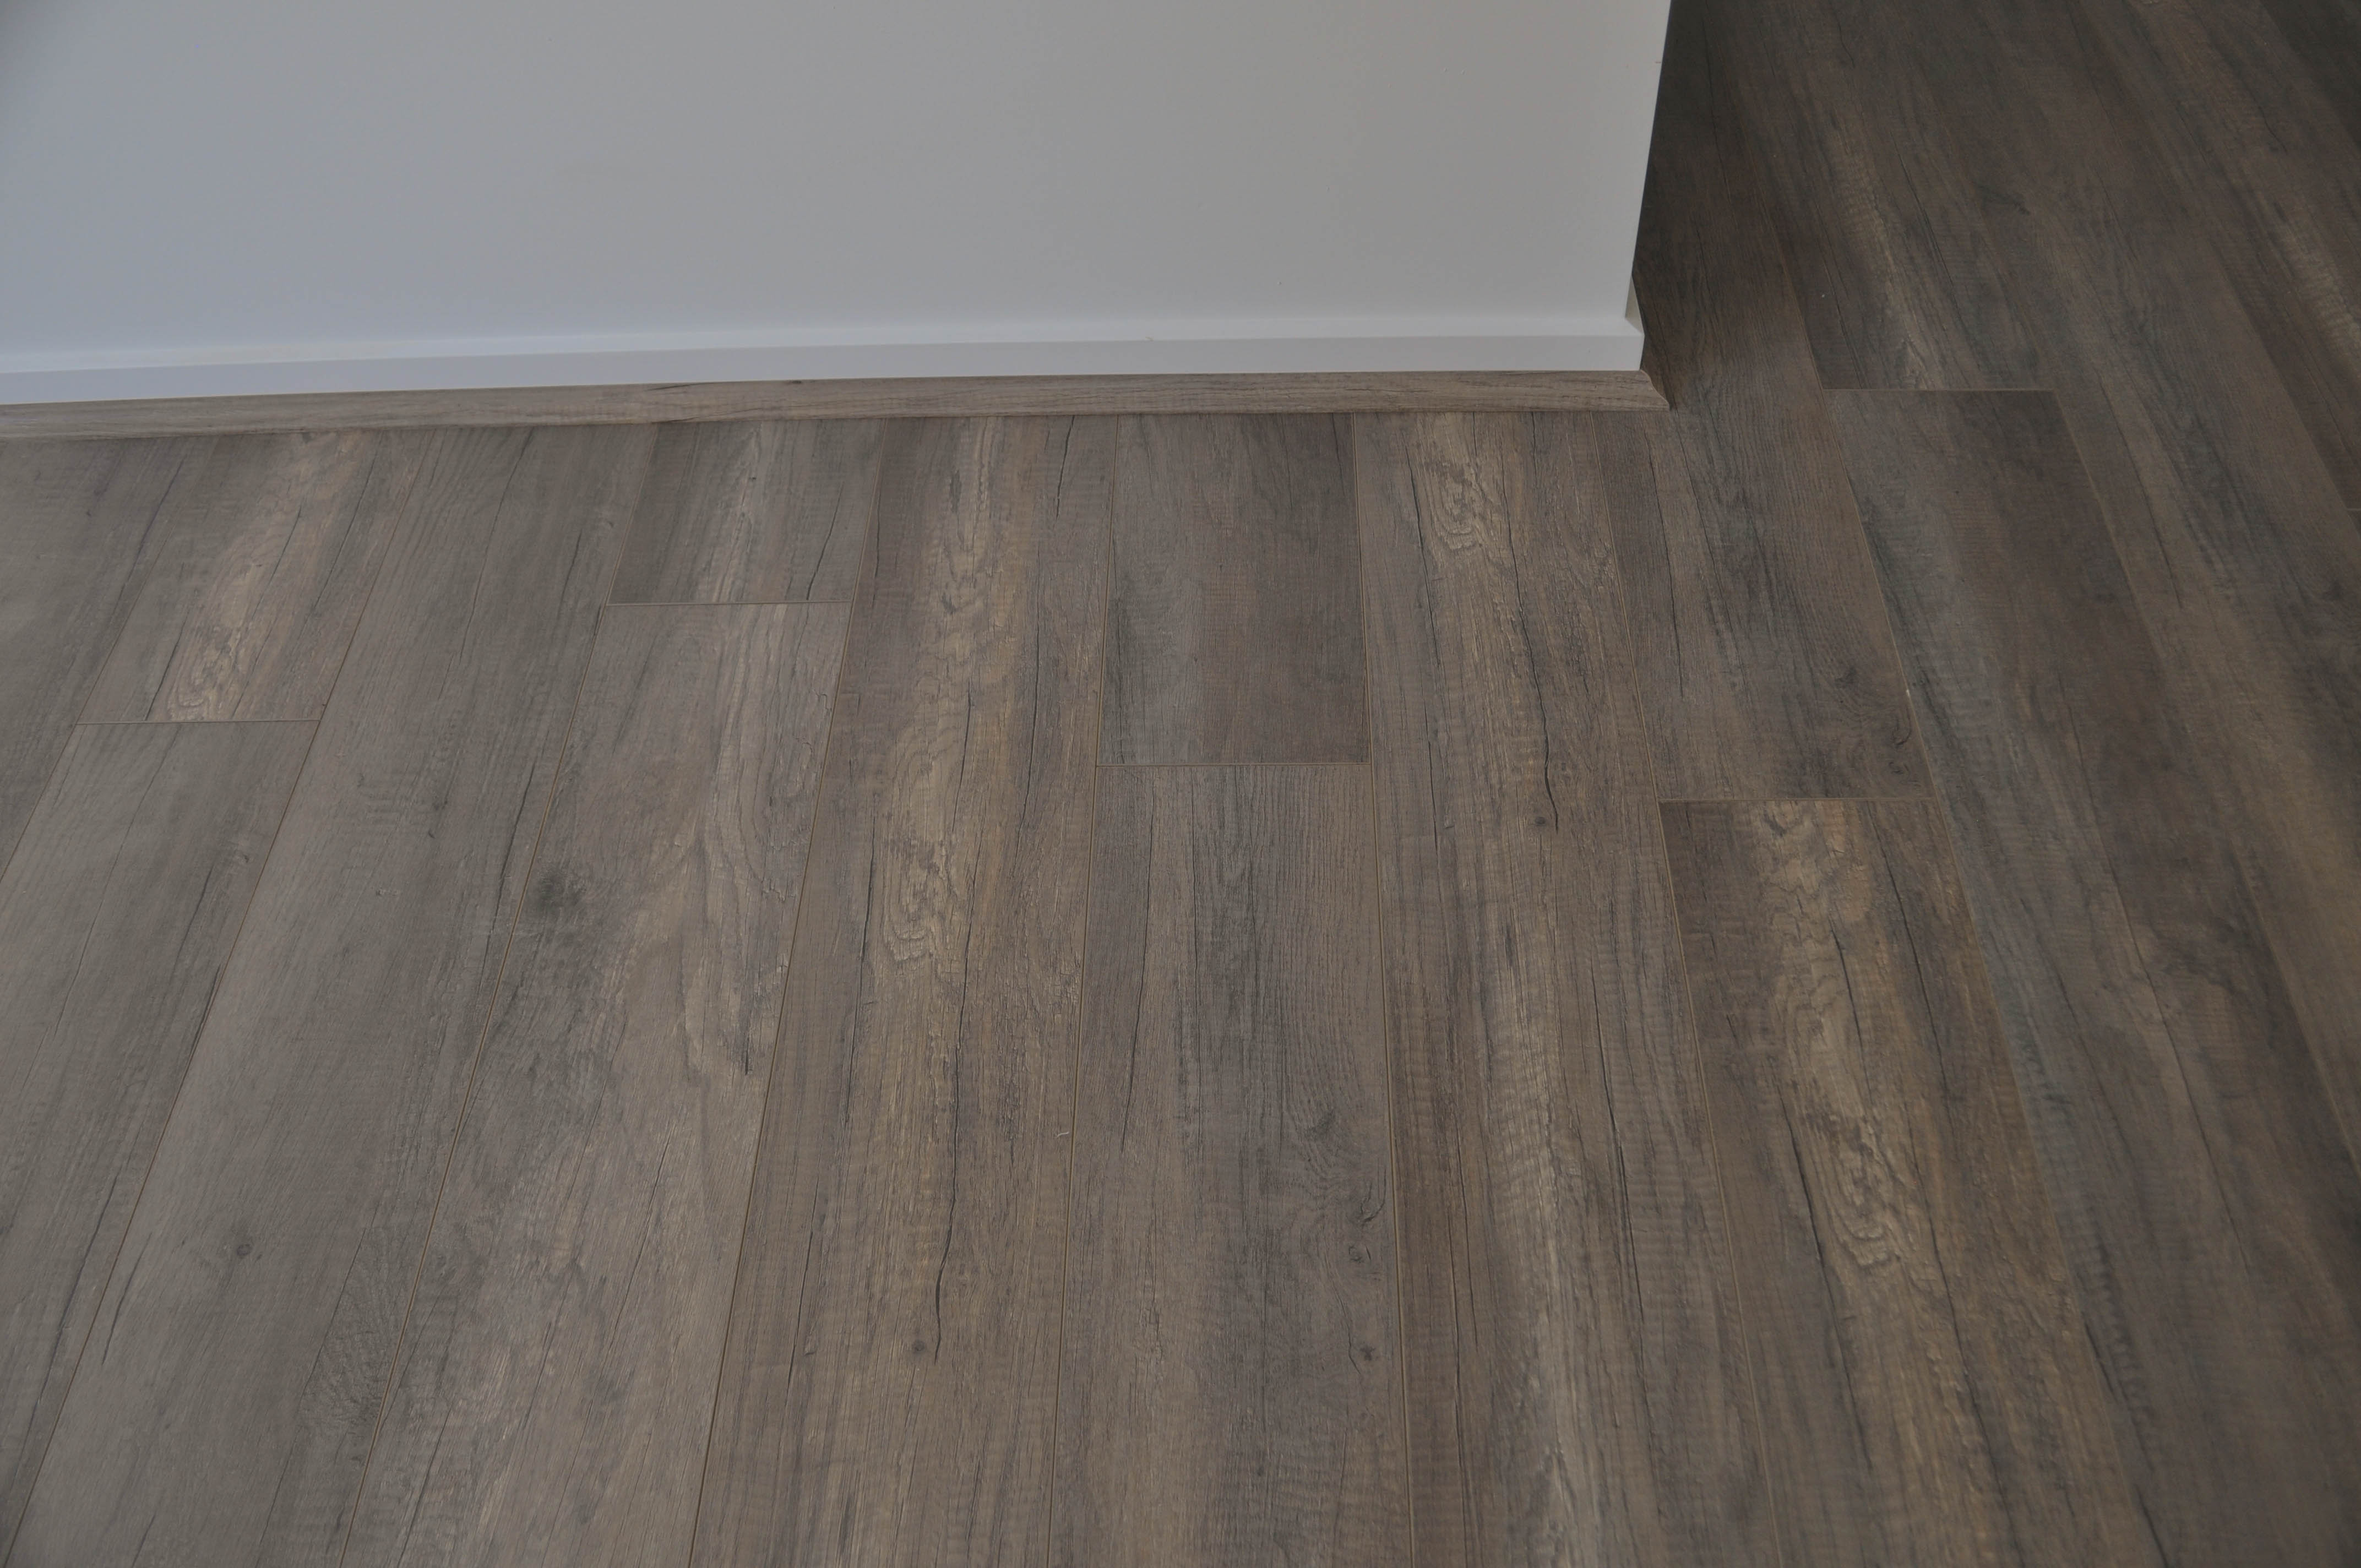 showing 12mm thick grey oak laminate flooring installed in a room in the suburb of Werribee Vic 3340 by 
  Concord Floors next to patterned polypropelene, dak grey carpet and painted walls showing the interplay of the materials and their colors to produce
harmony in the color scheme of interior decor in this home.It also shows the hard top surface of the laminate flooring which is even and the picture illustrates the ease 
with which the surface of a laminate floor can be cleaned. The home is in the suburb of Hoppers Crossing, Vic 3029 and the laminate floorboards and the 
carpet was supplied and laid by Concord Floors.